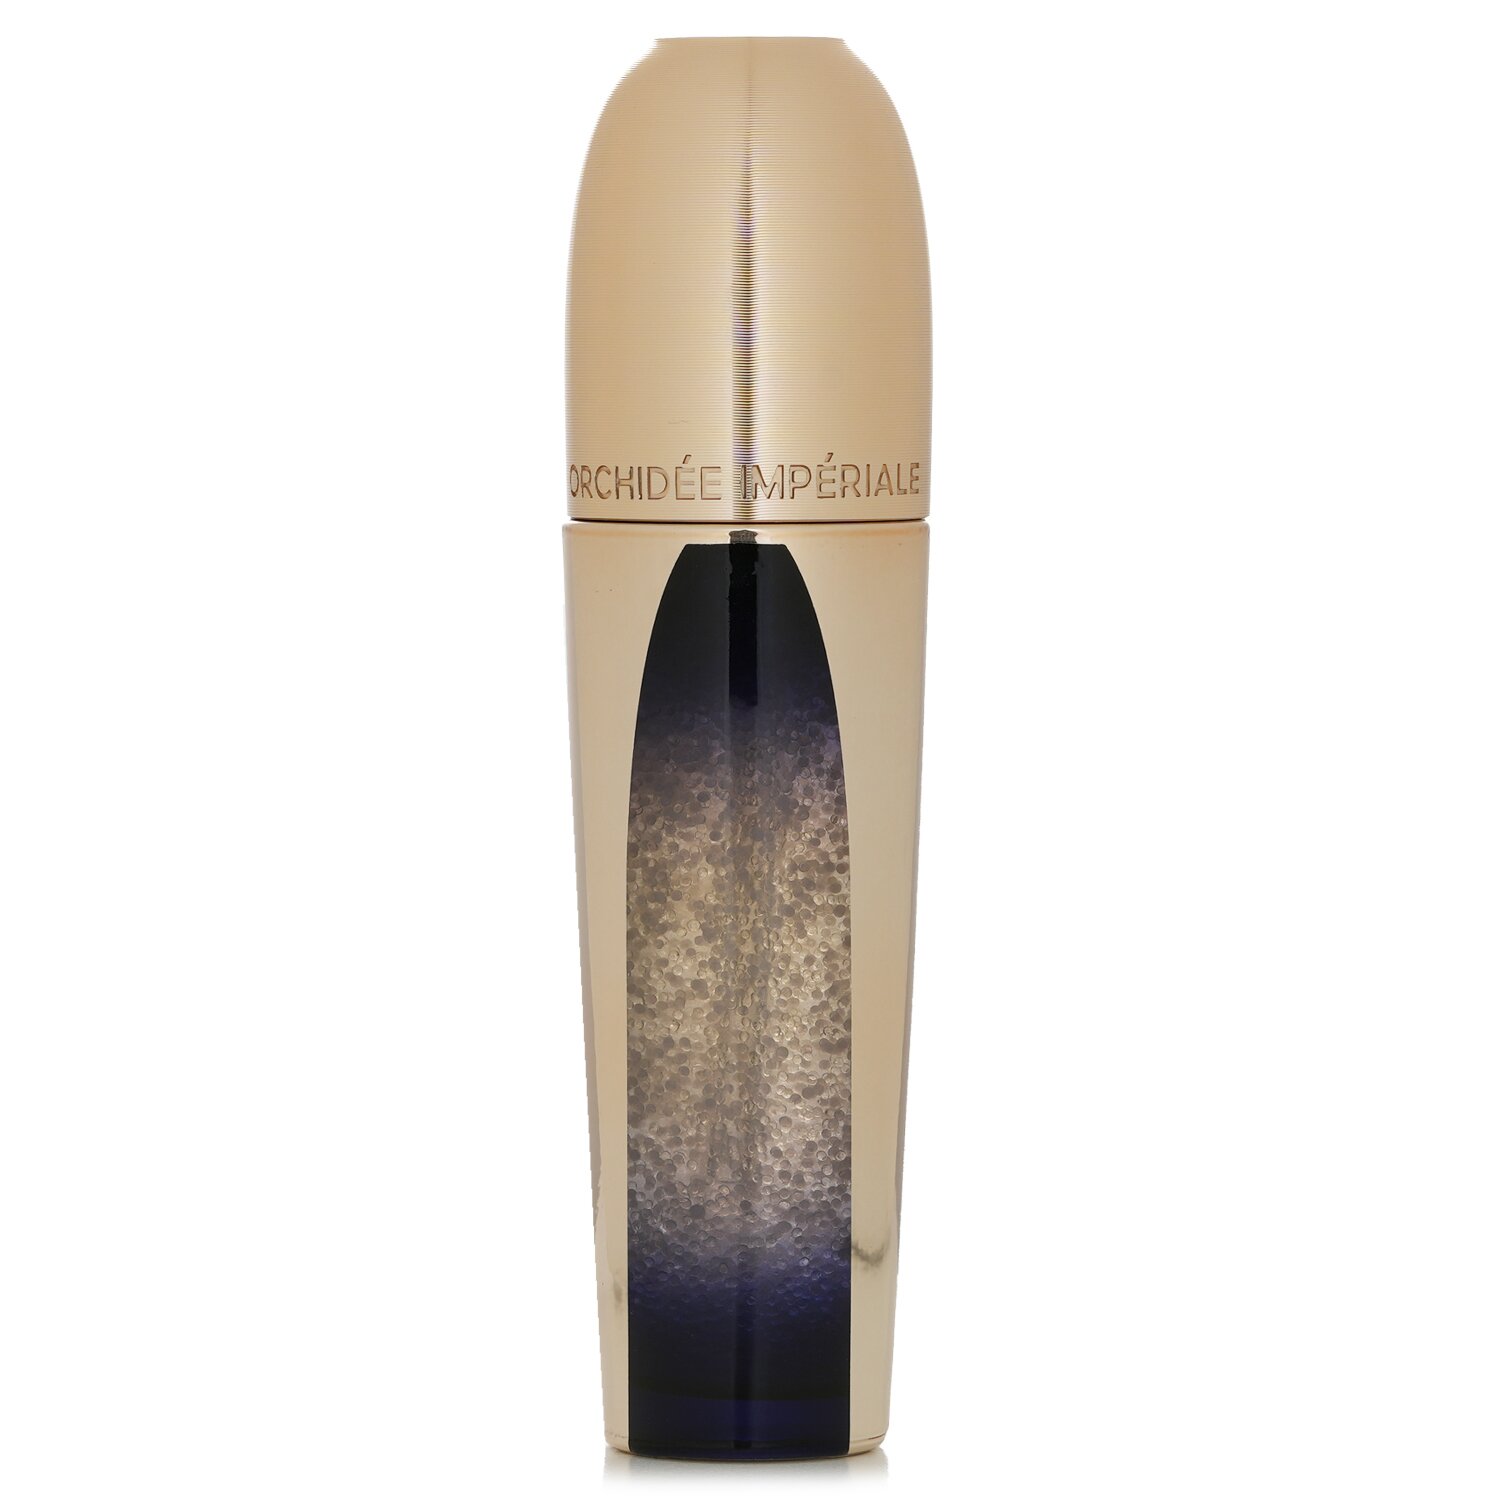 Lifting Face Serum - Guerlain Orchidee Imperiale The Micro-Lift